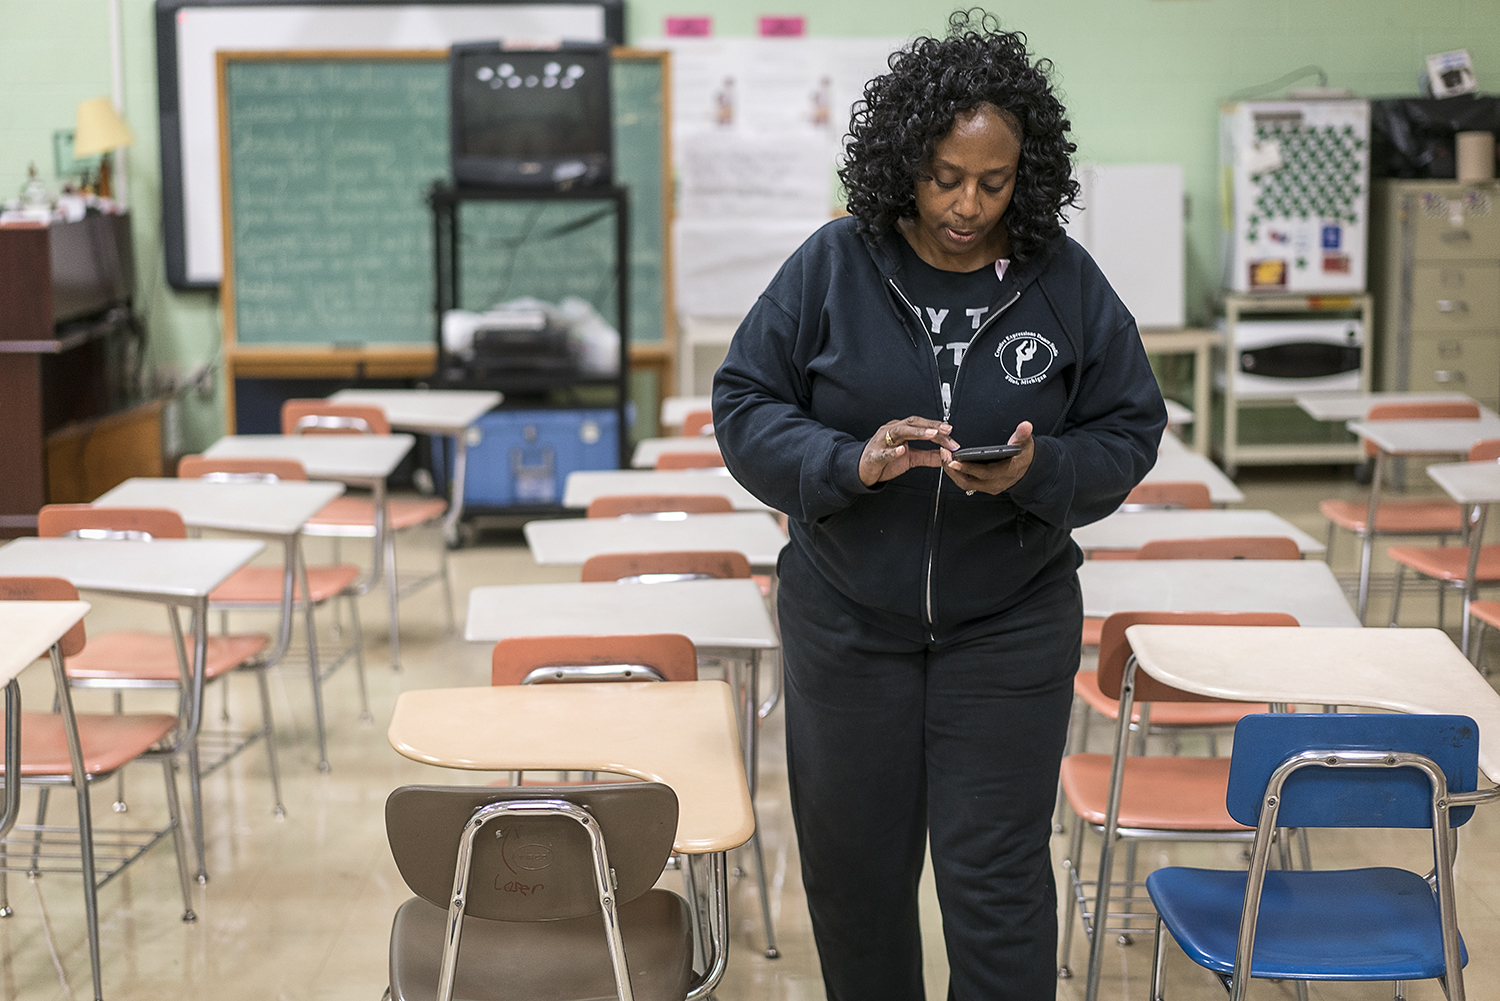 Walking between rows of empty desks in her classroom at Flint Northwestern High School, Sheila Miller-Graham checks her phone for messages before putting away homecoming decorations. Between teaching at Flint Northwestern and running Creative Express